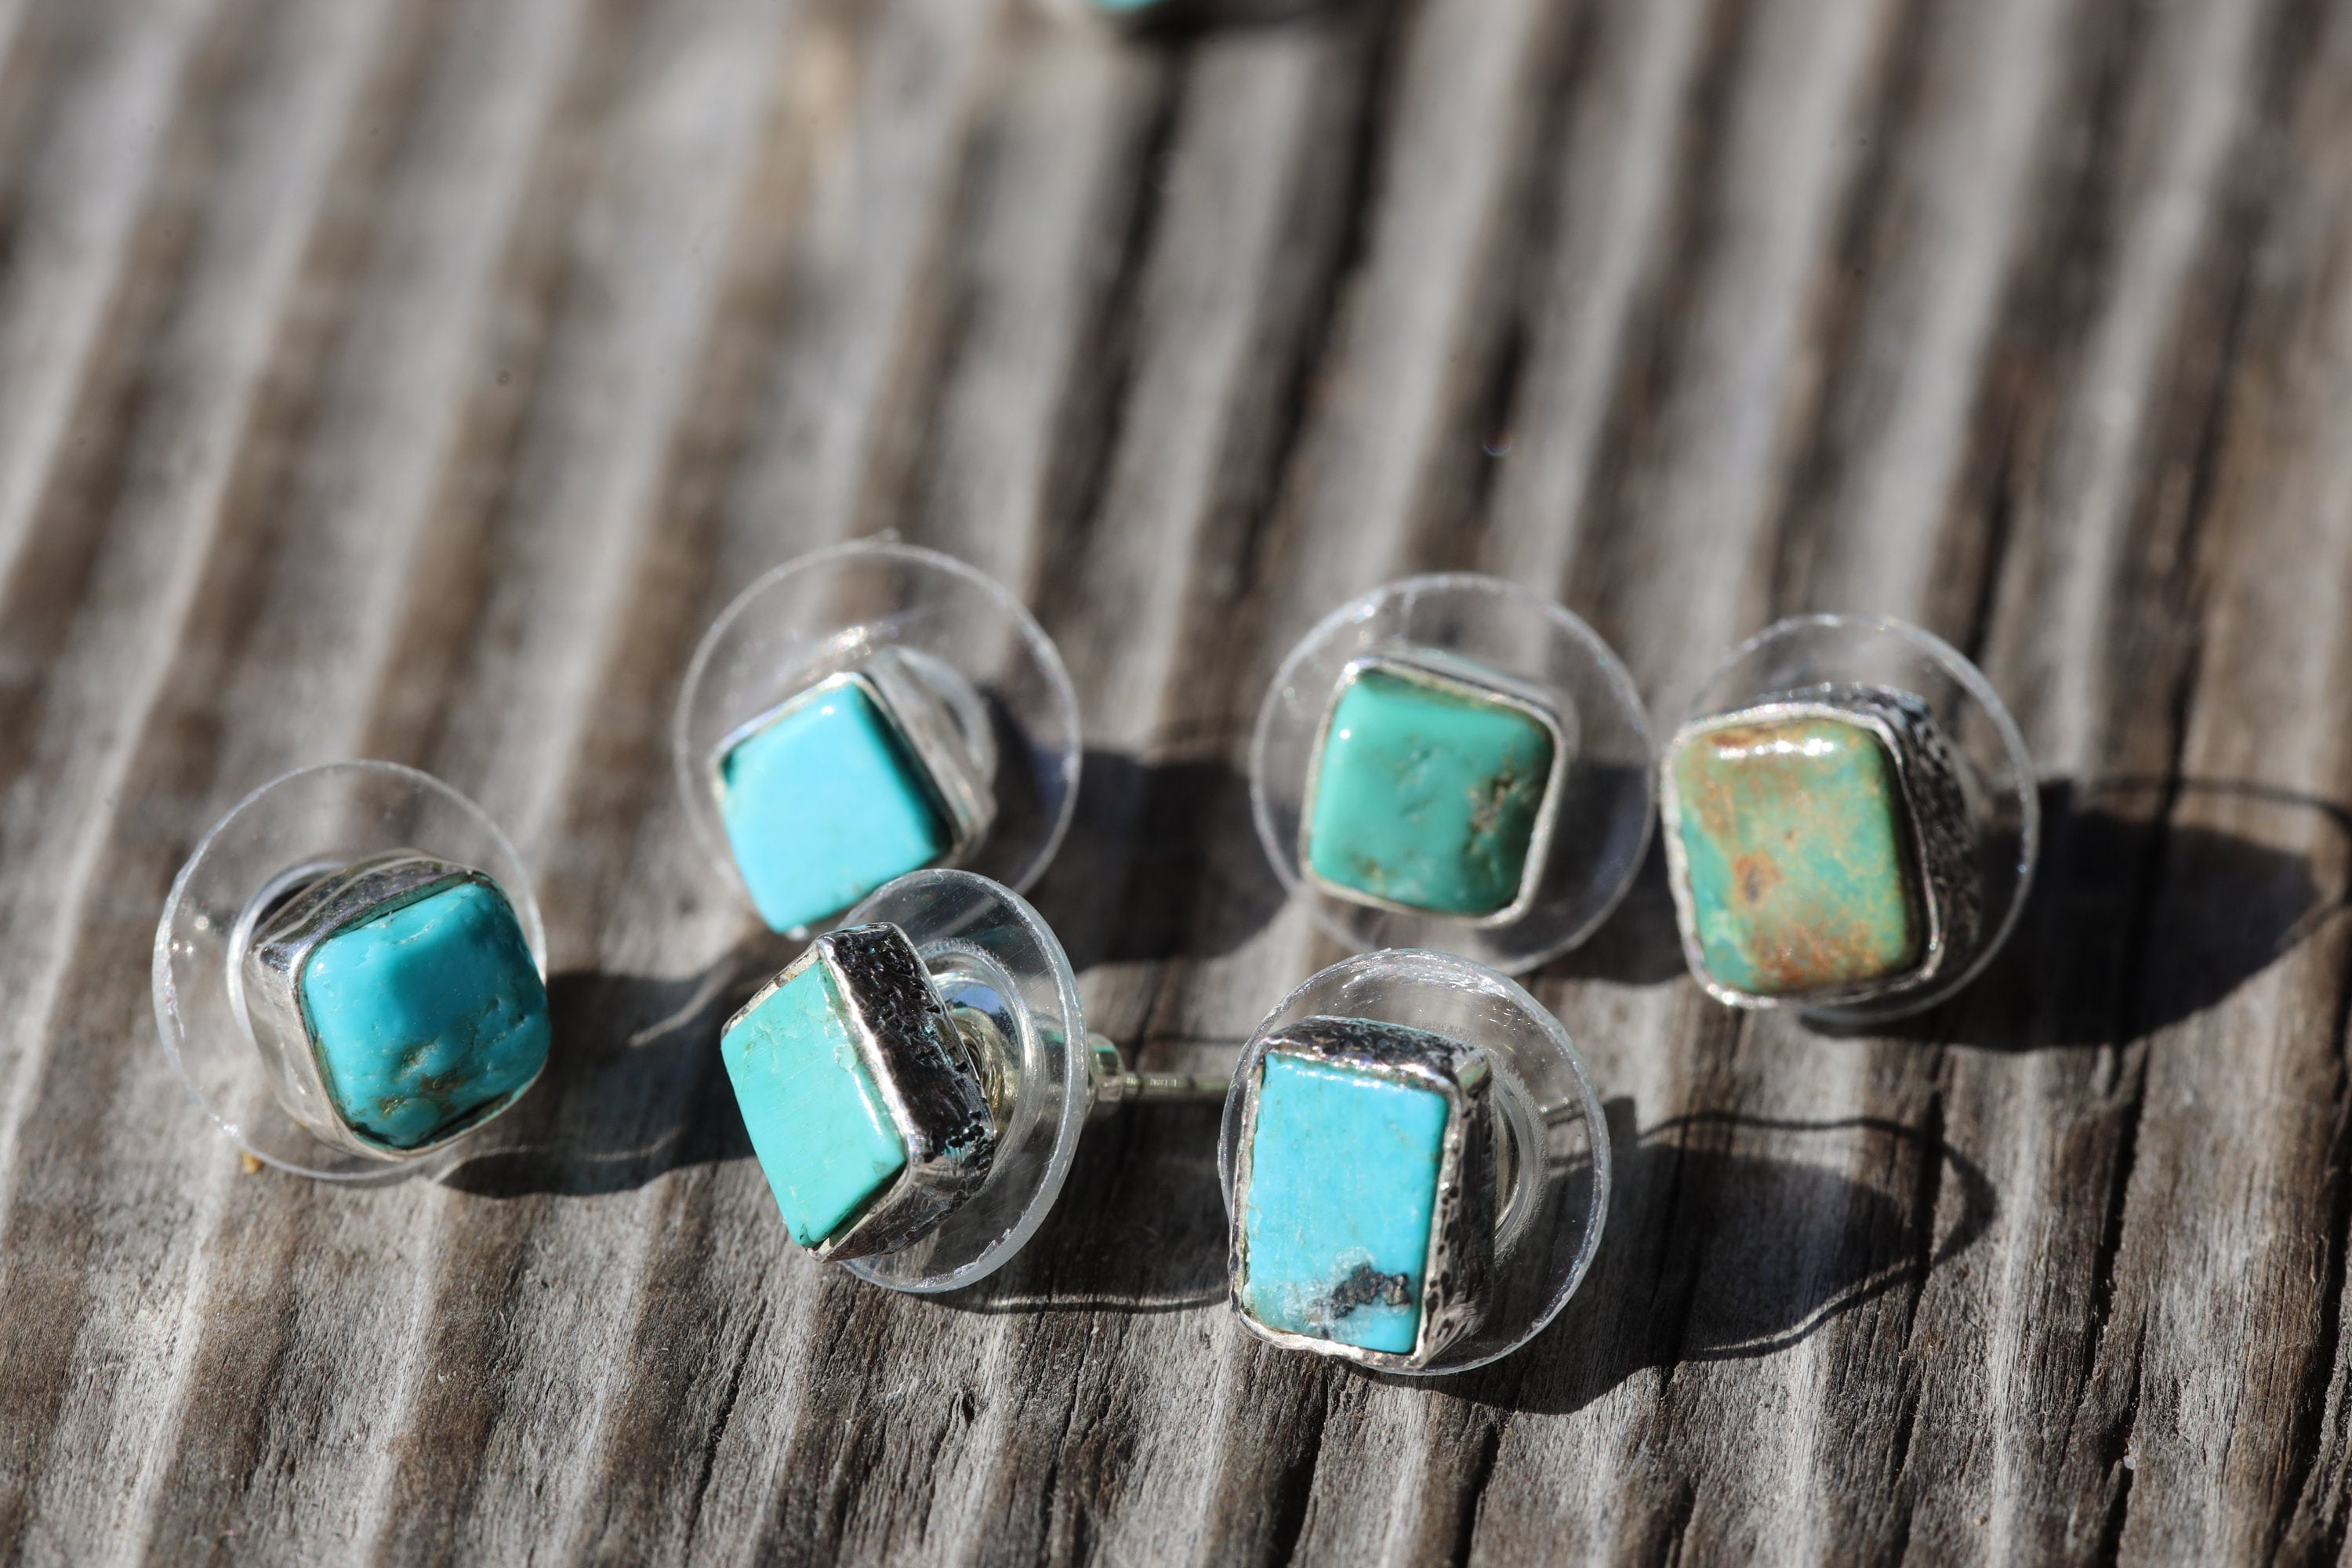 Turquoise High Grade Old Cut American Sleeping Beauty Pair- Sterling Silver - Textured Oxidised - Freeform Earring Studs